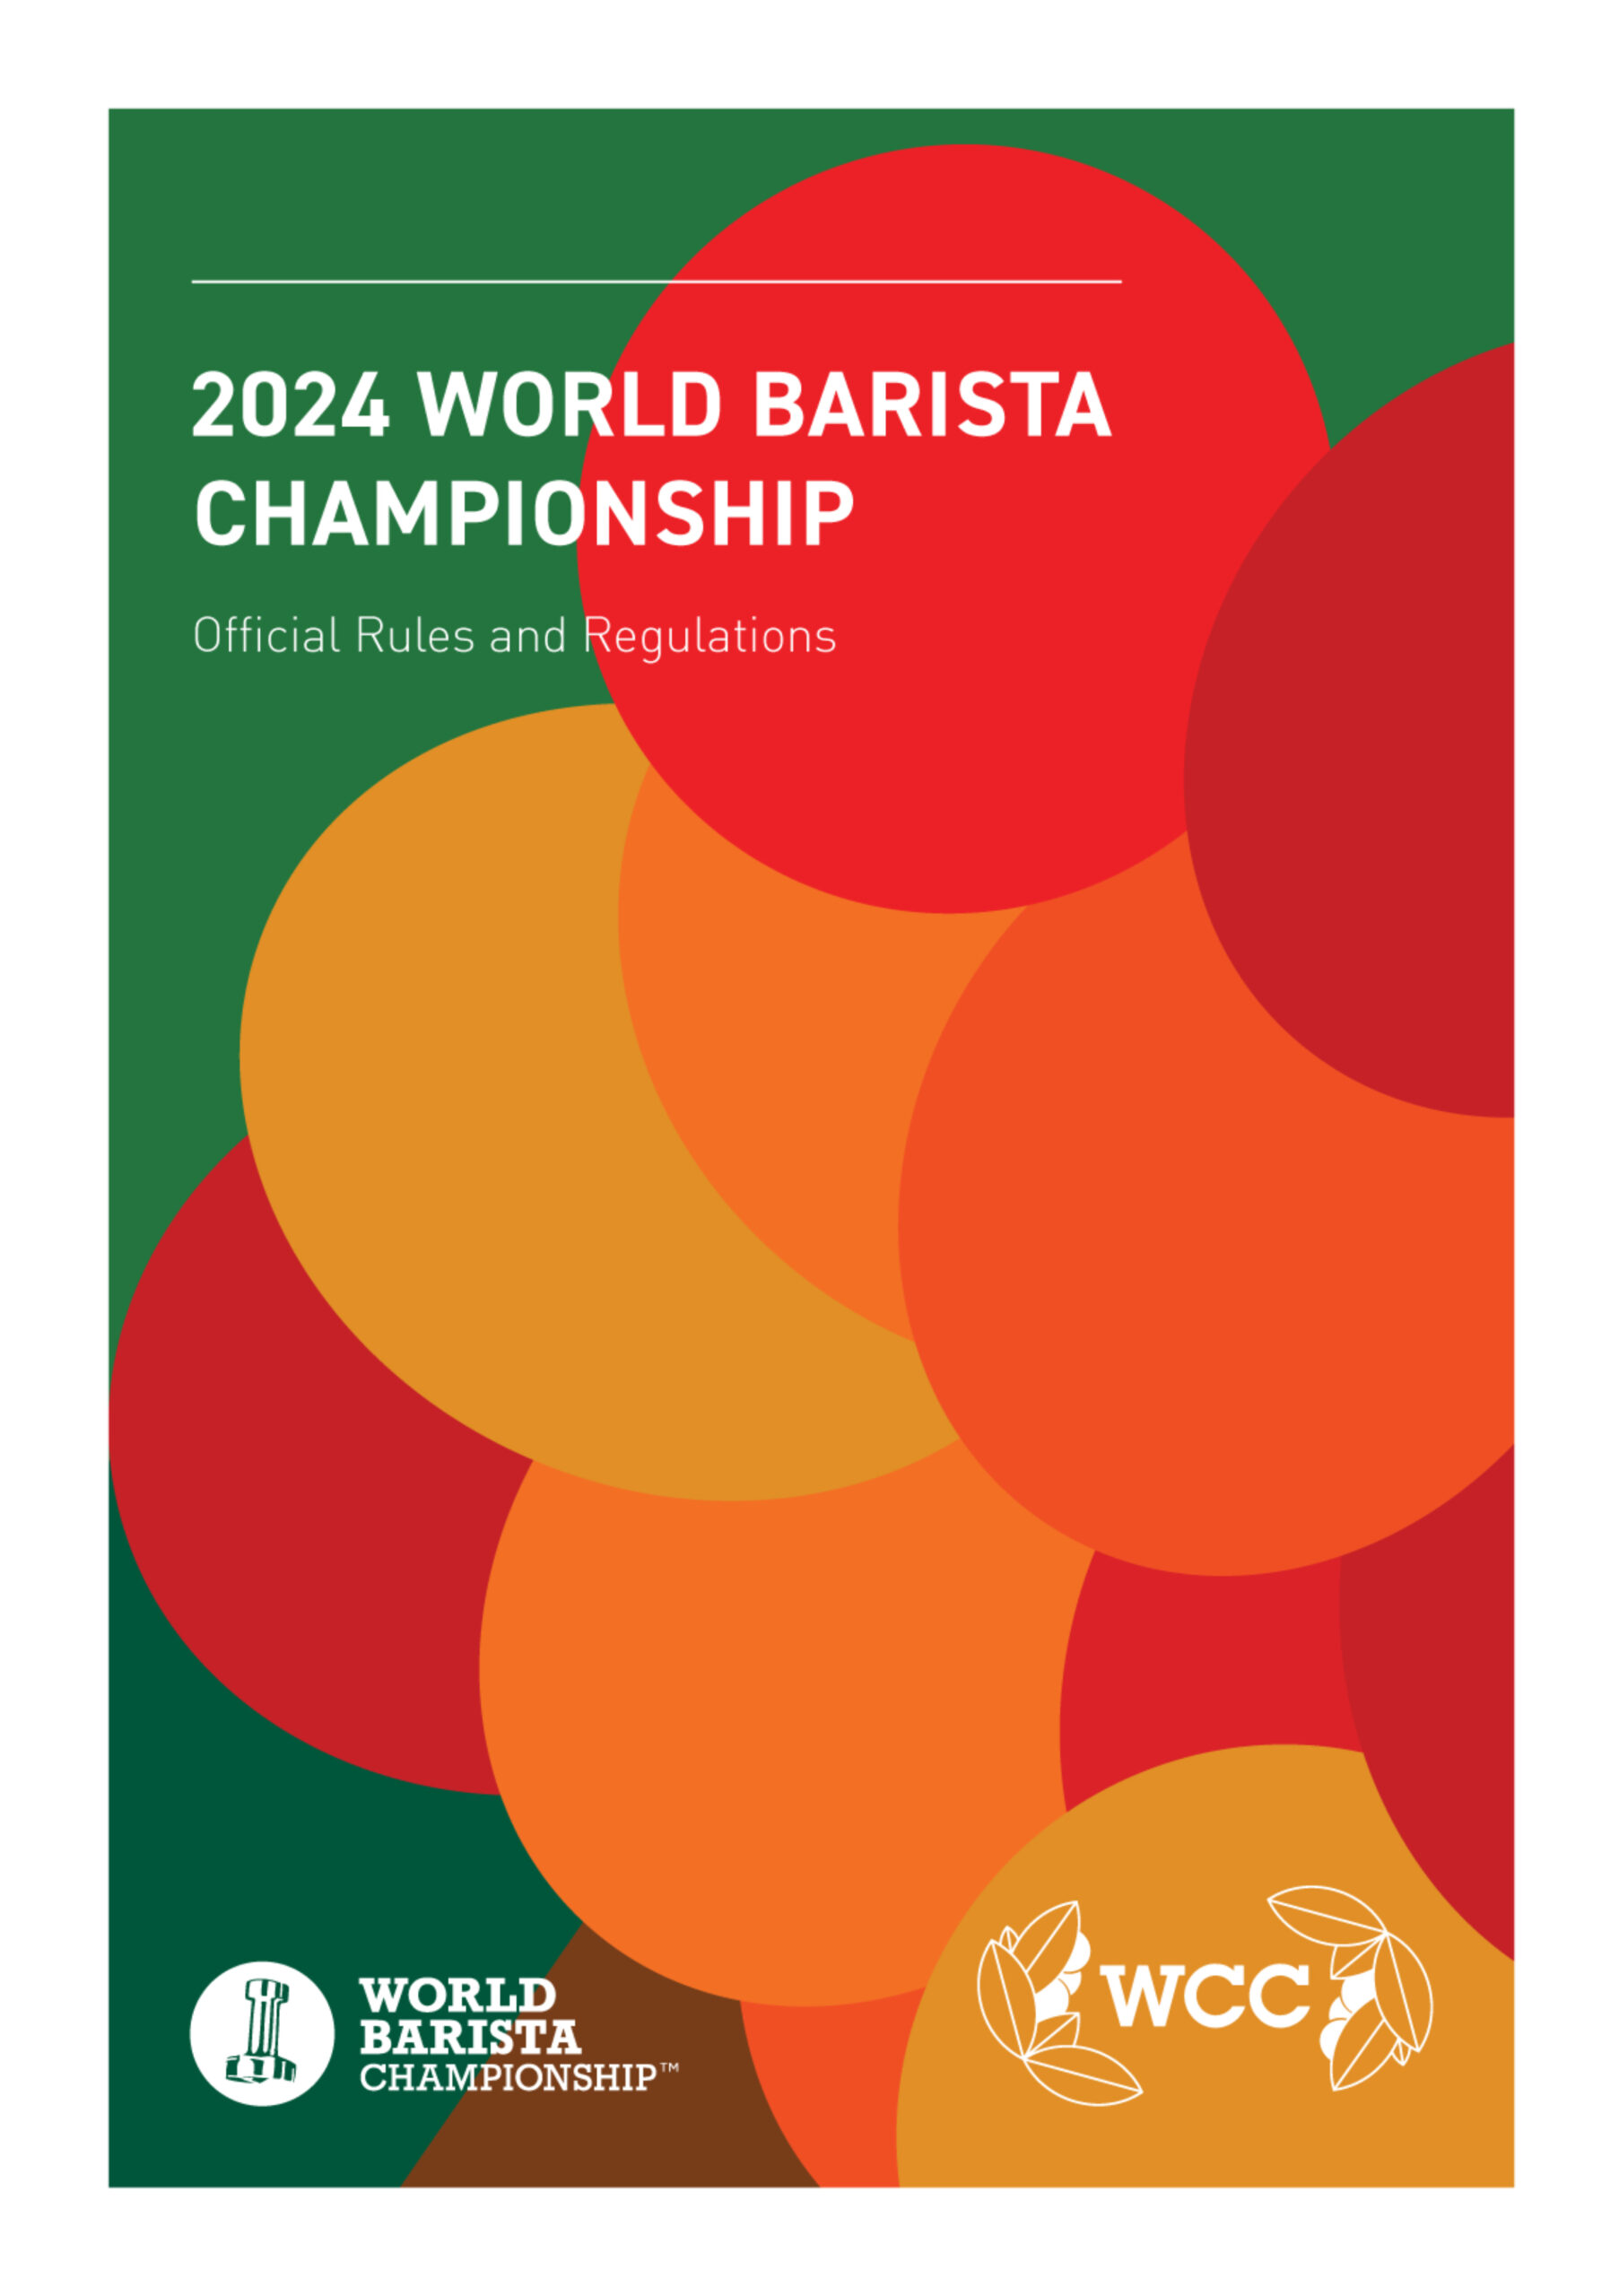 Crucial changes to the rules of the 2024 World Barista Championship ...